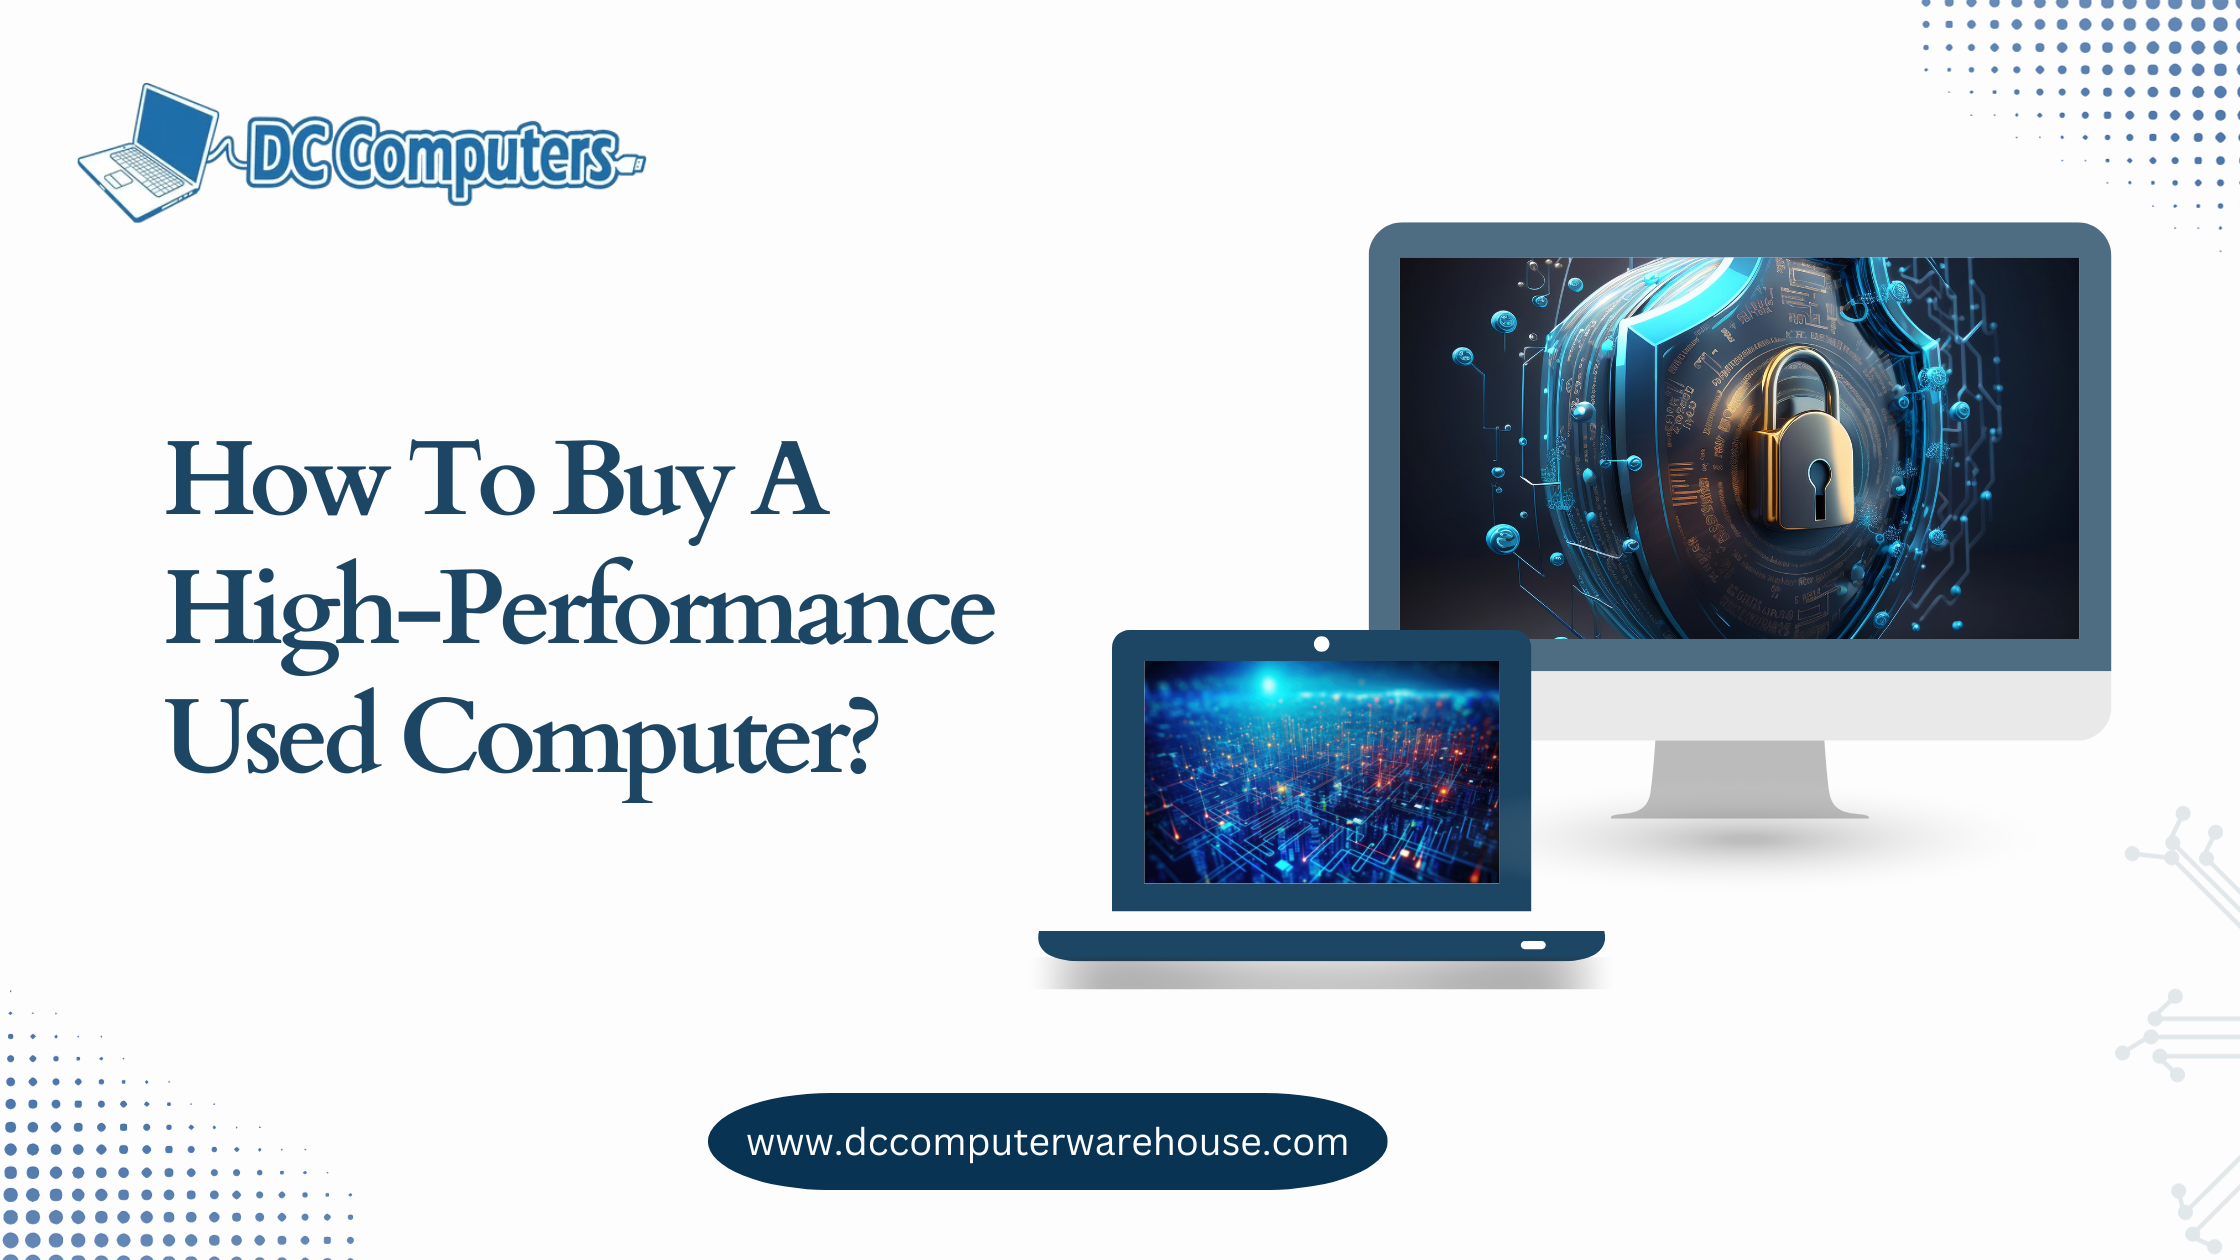 How To Buy A High-Performance Used Computer?